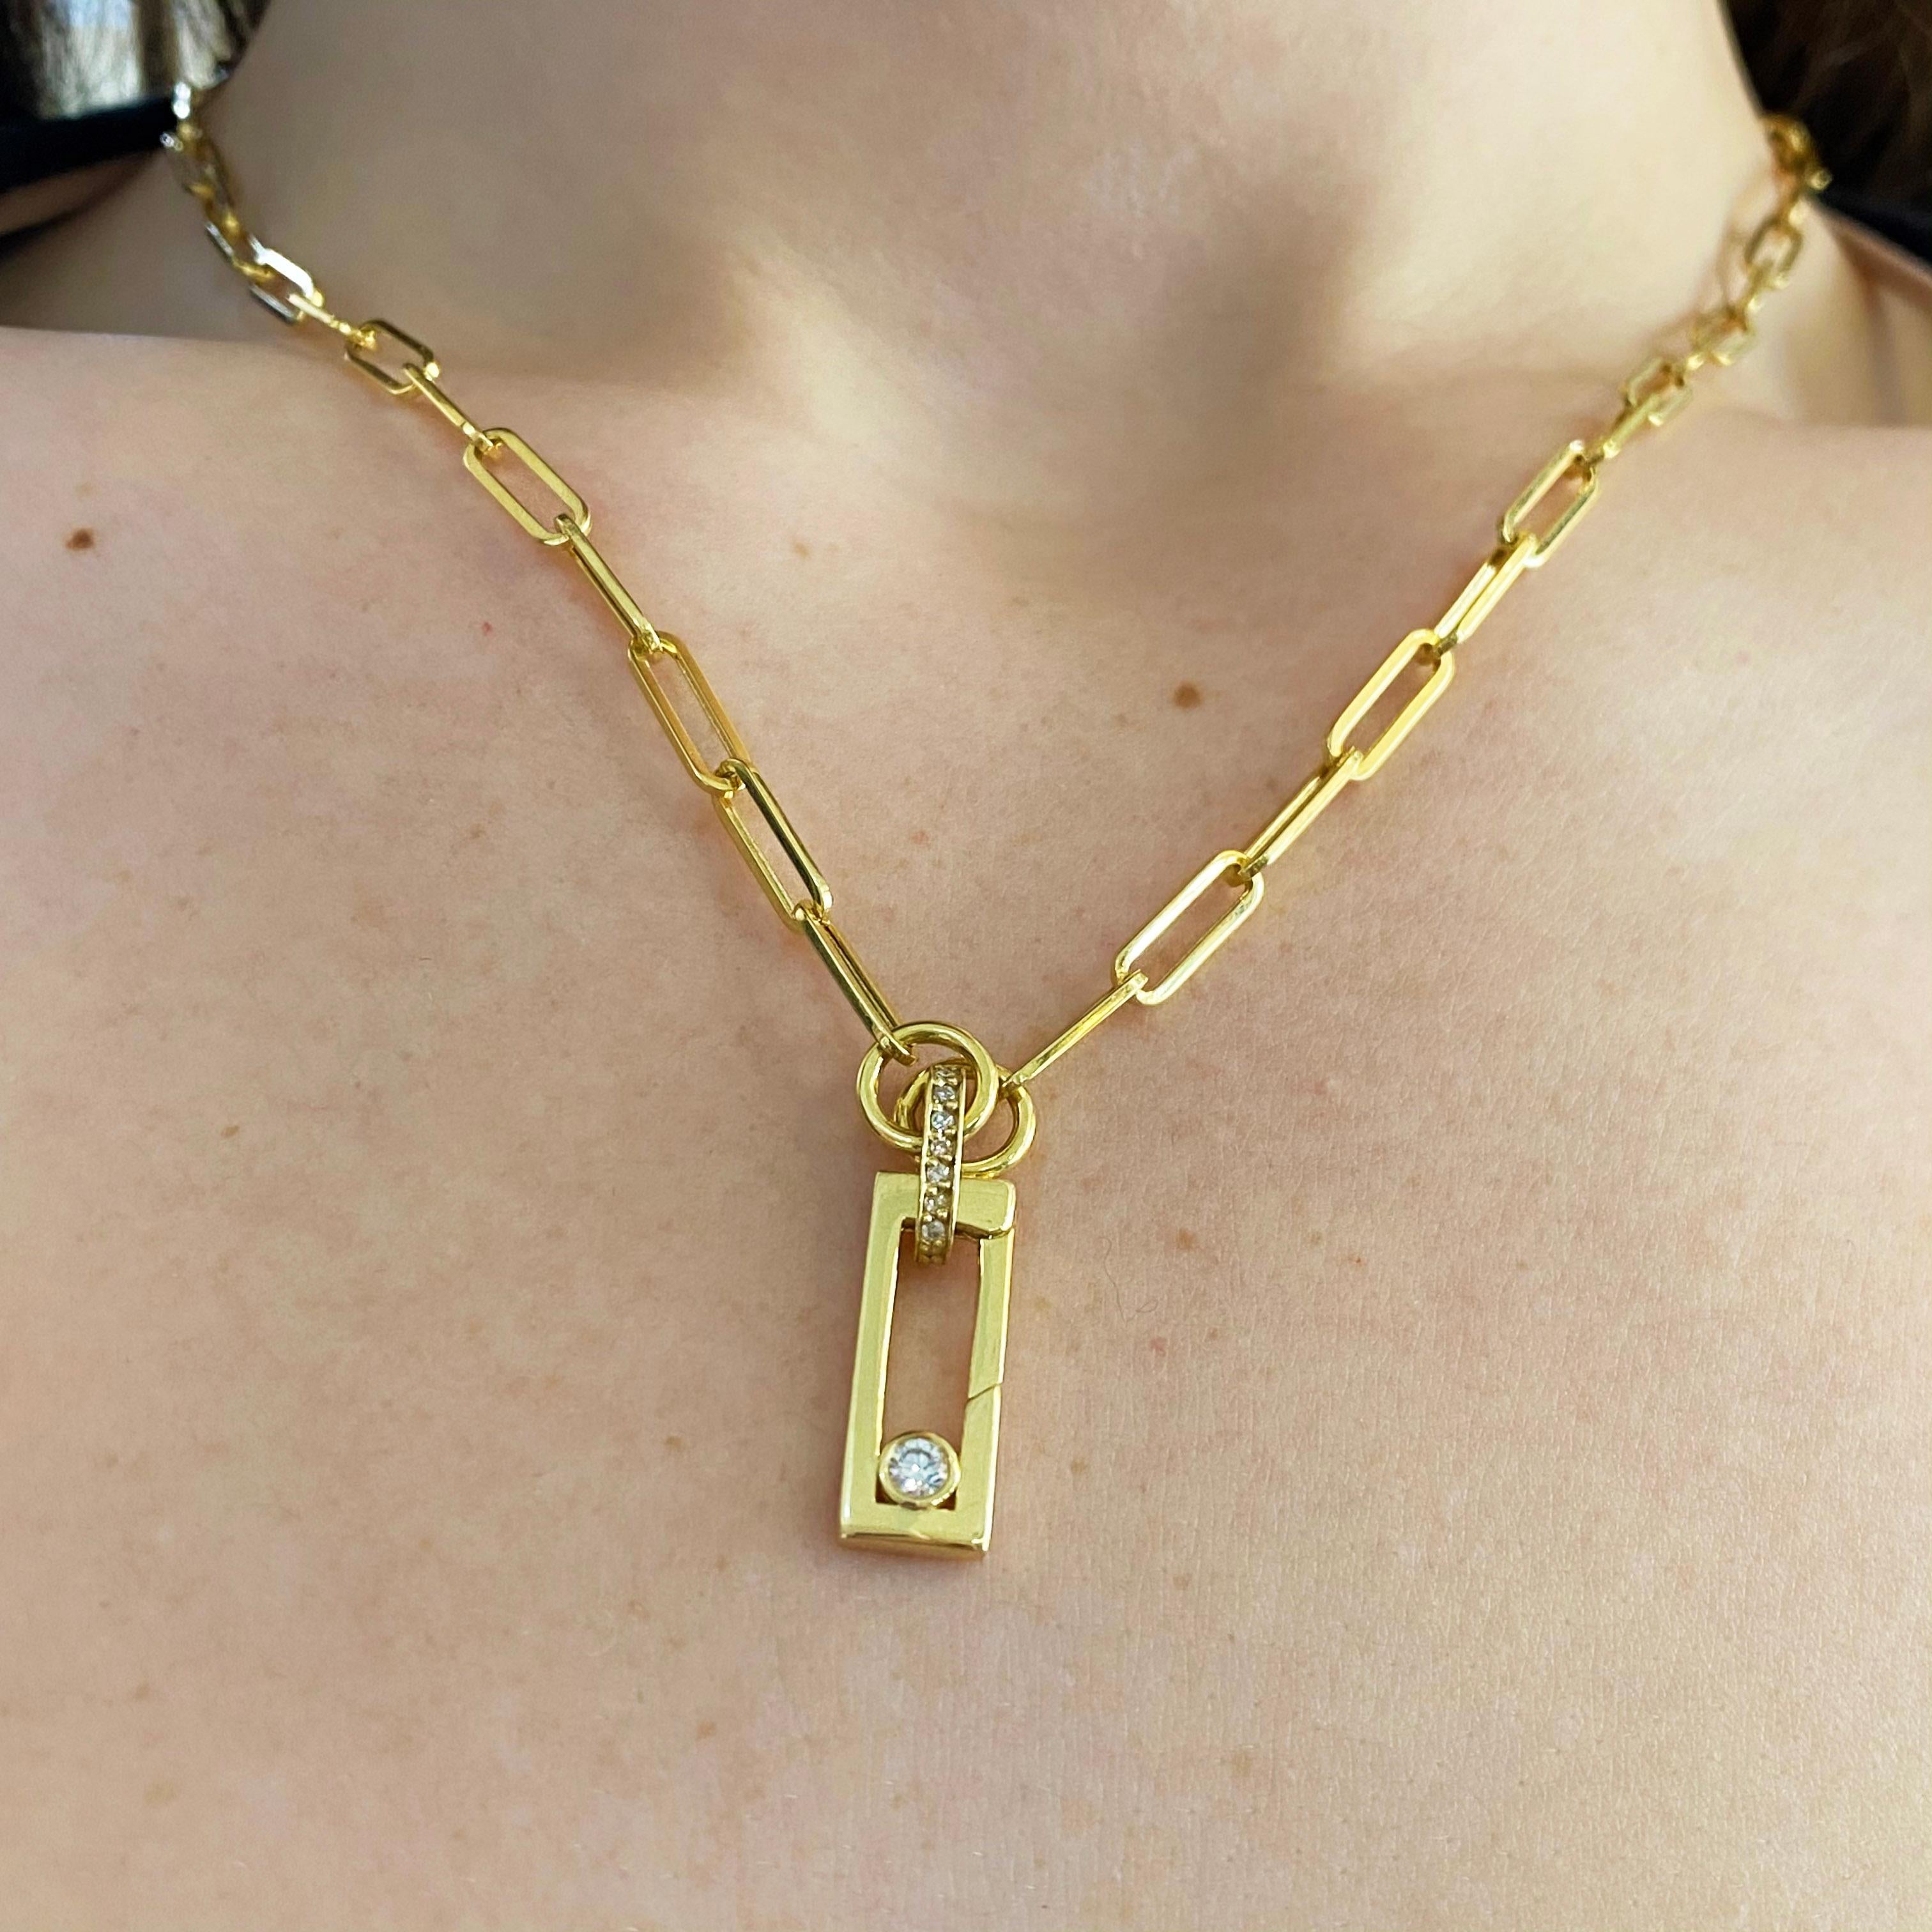 2022 is all about customizing your jewelry and to show your style! This gorgeous 14 karat yellow gold 3.6 millimeter, paperclip chain is the perfect necklace for the diamond lock and the diamond pendant. It flows well and shows that you are on top